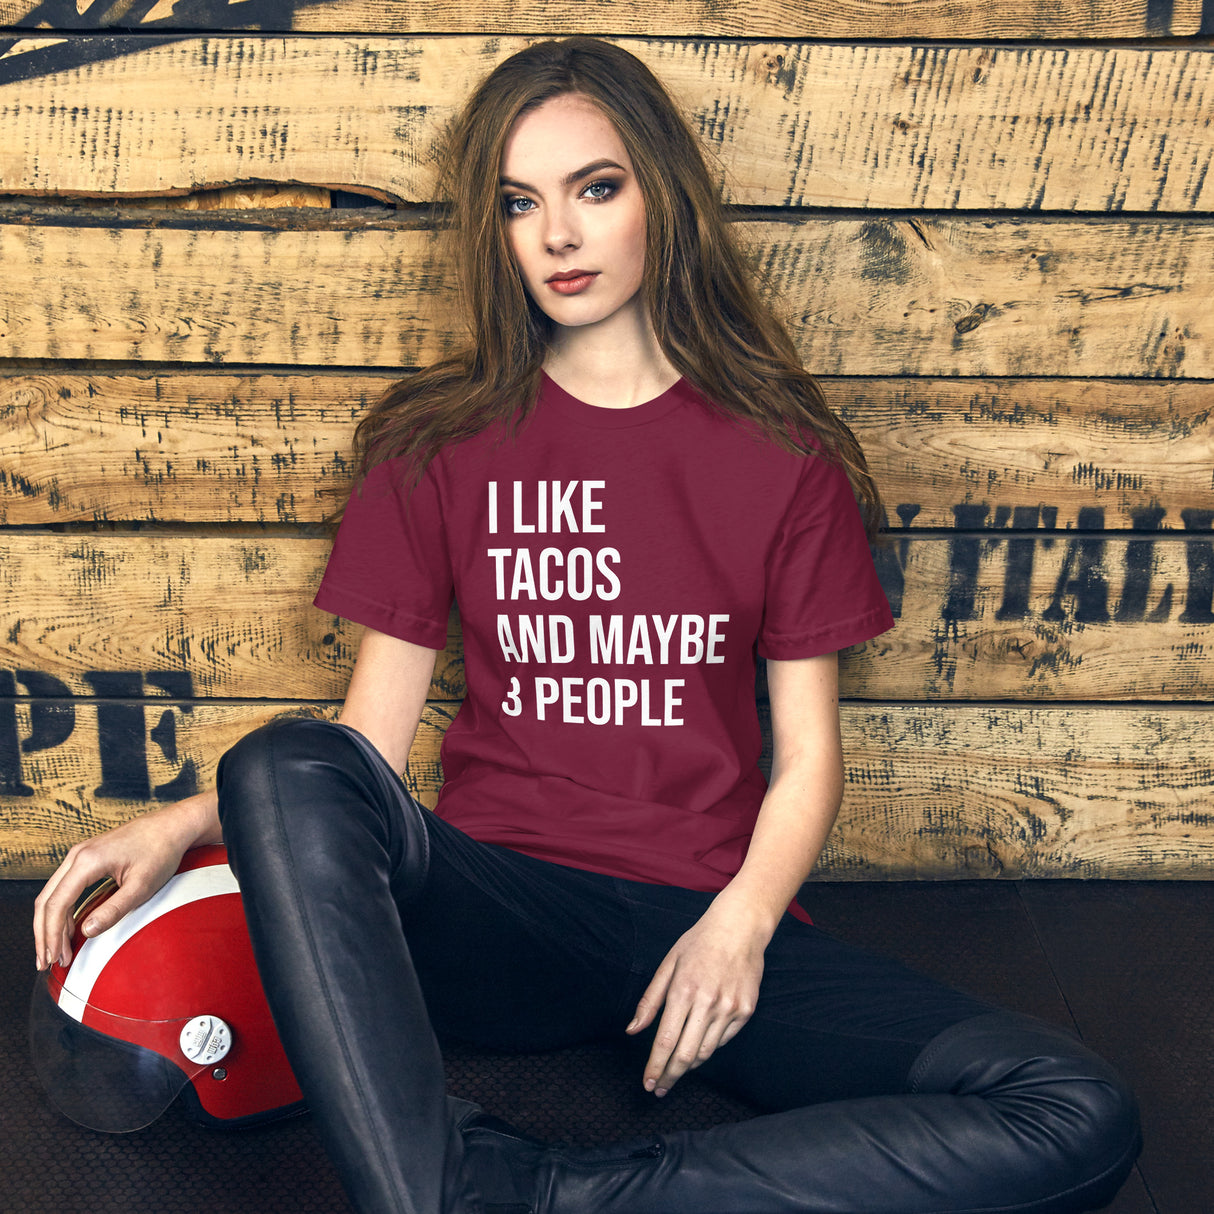 I Like Tacos and Maybe 3 People Women's Shirt